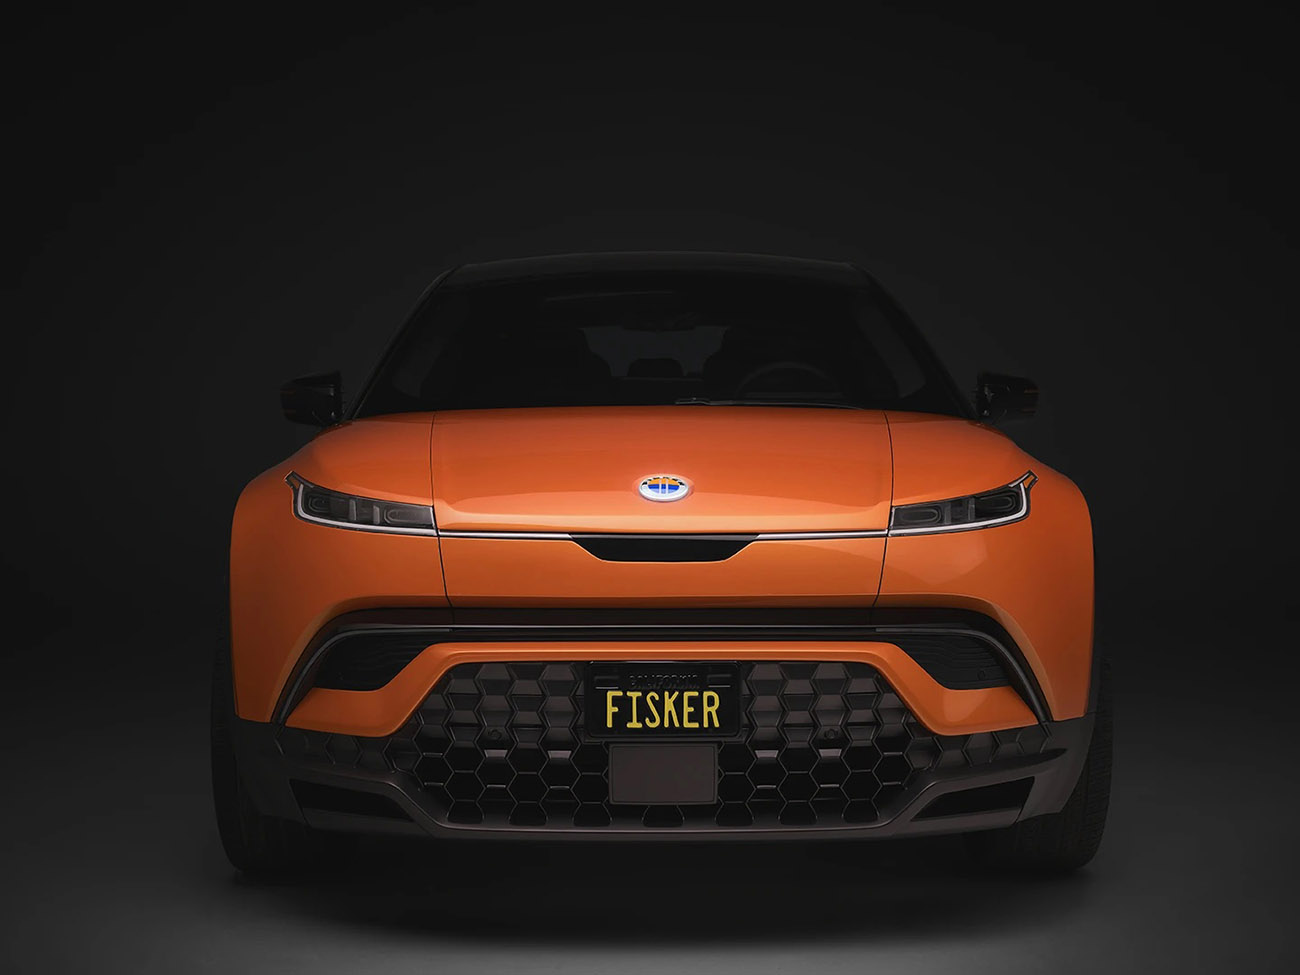 the Fisker Ocean SUV painted in orange seen from the direct front view